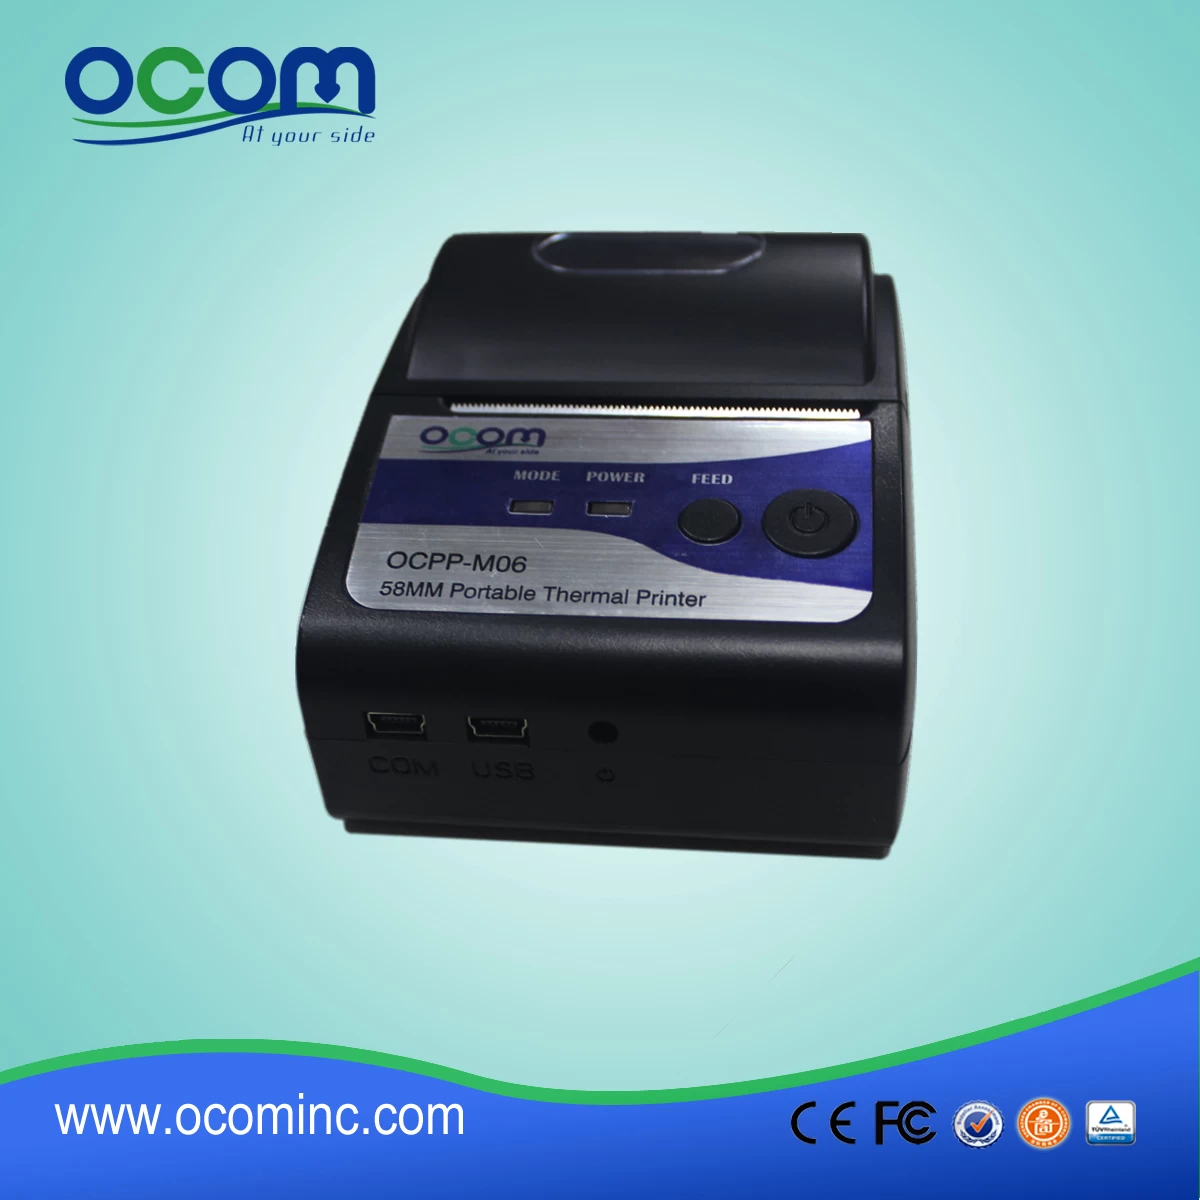 OCPP-M06 USB Powered Mini Taxi Receipt Thermal Printer for Android